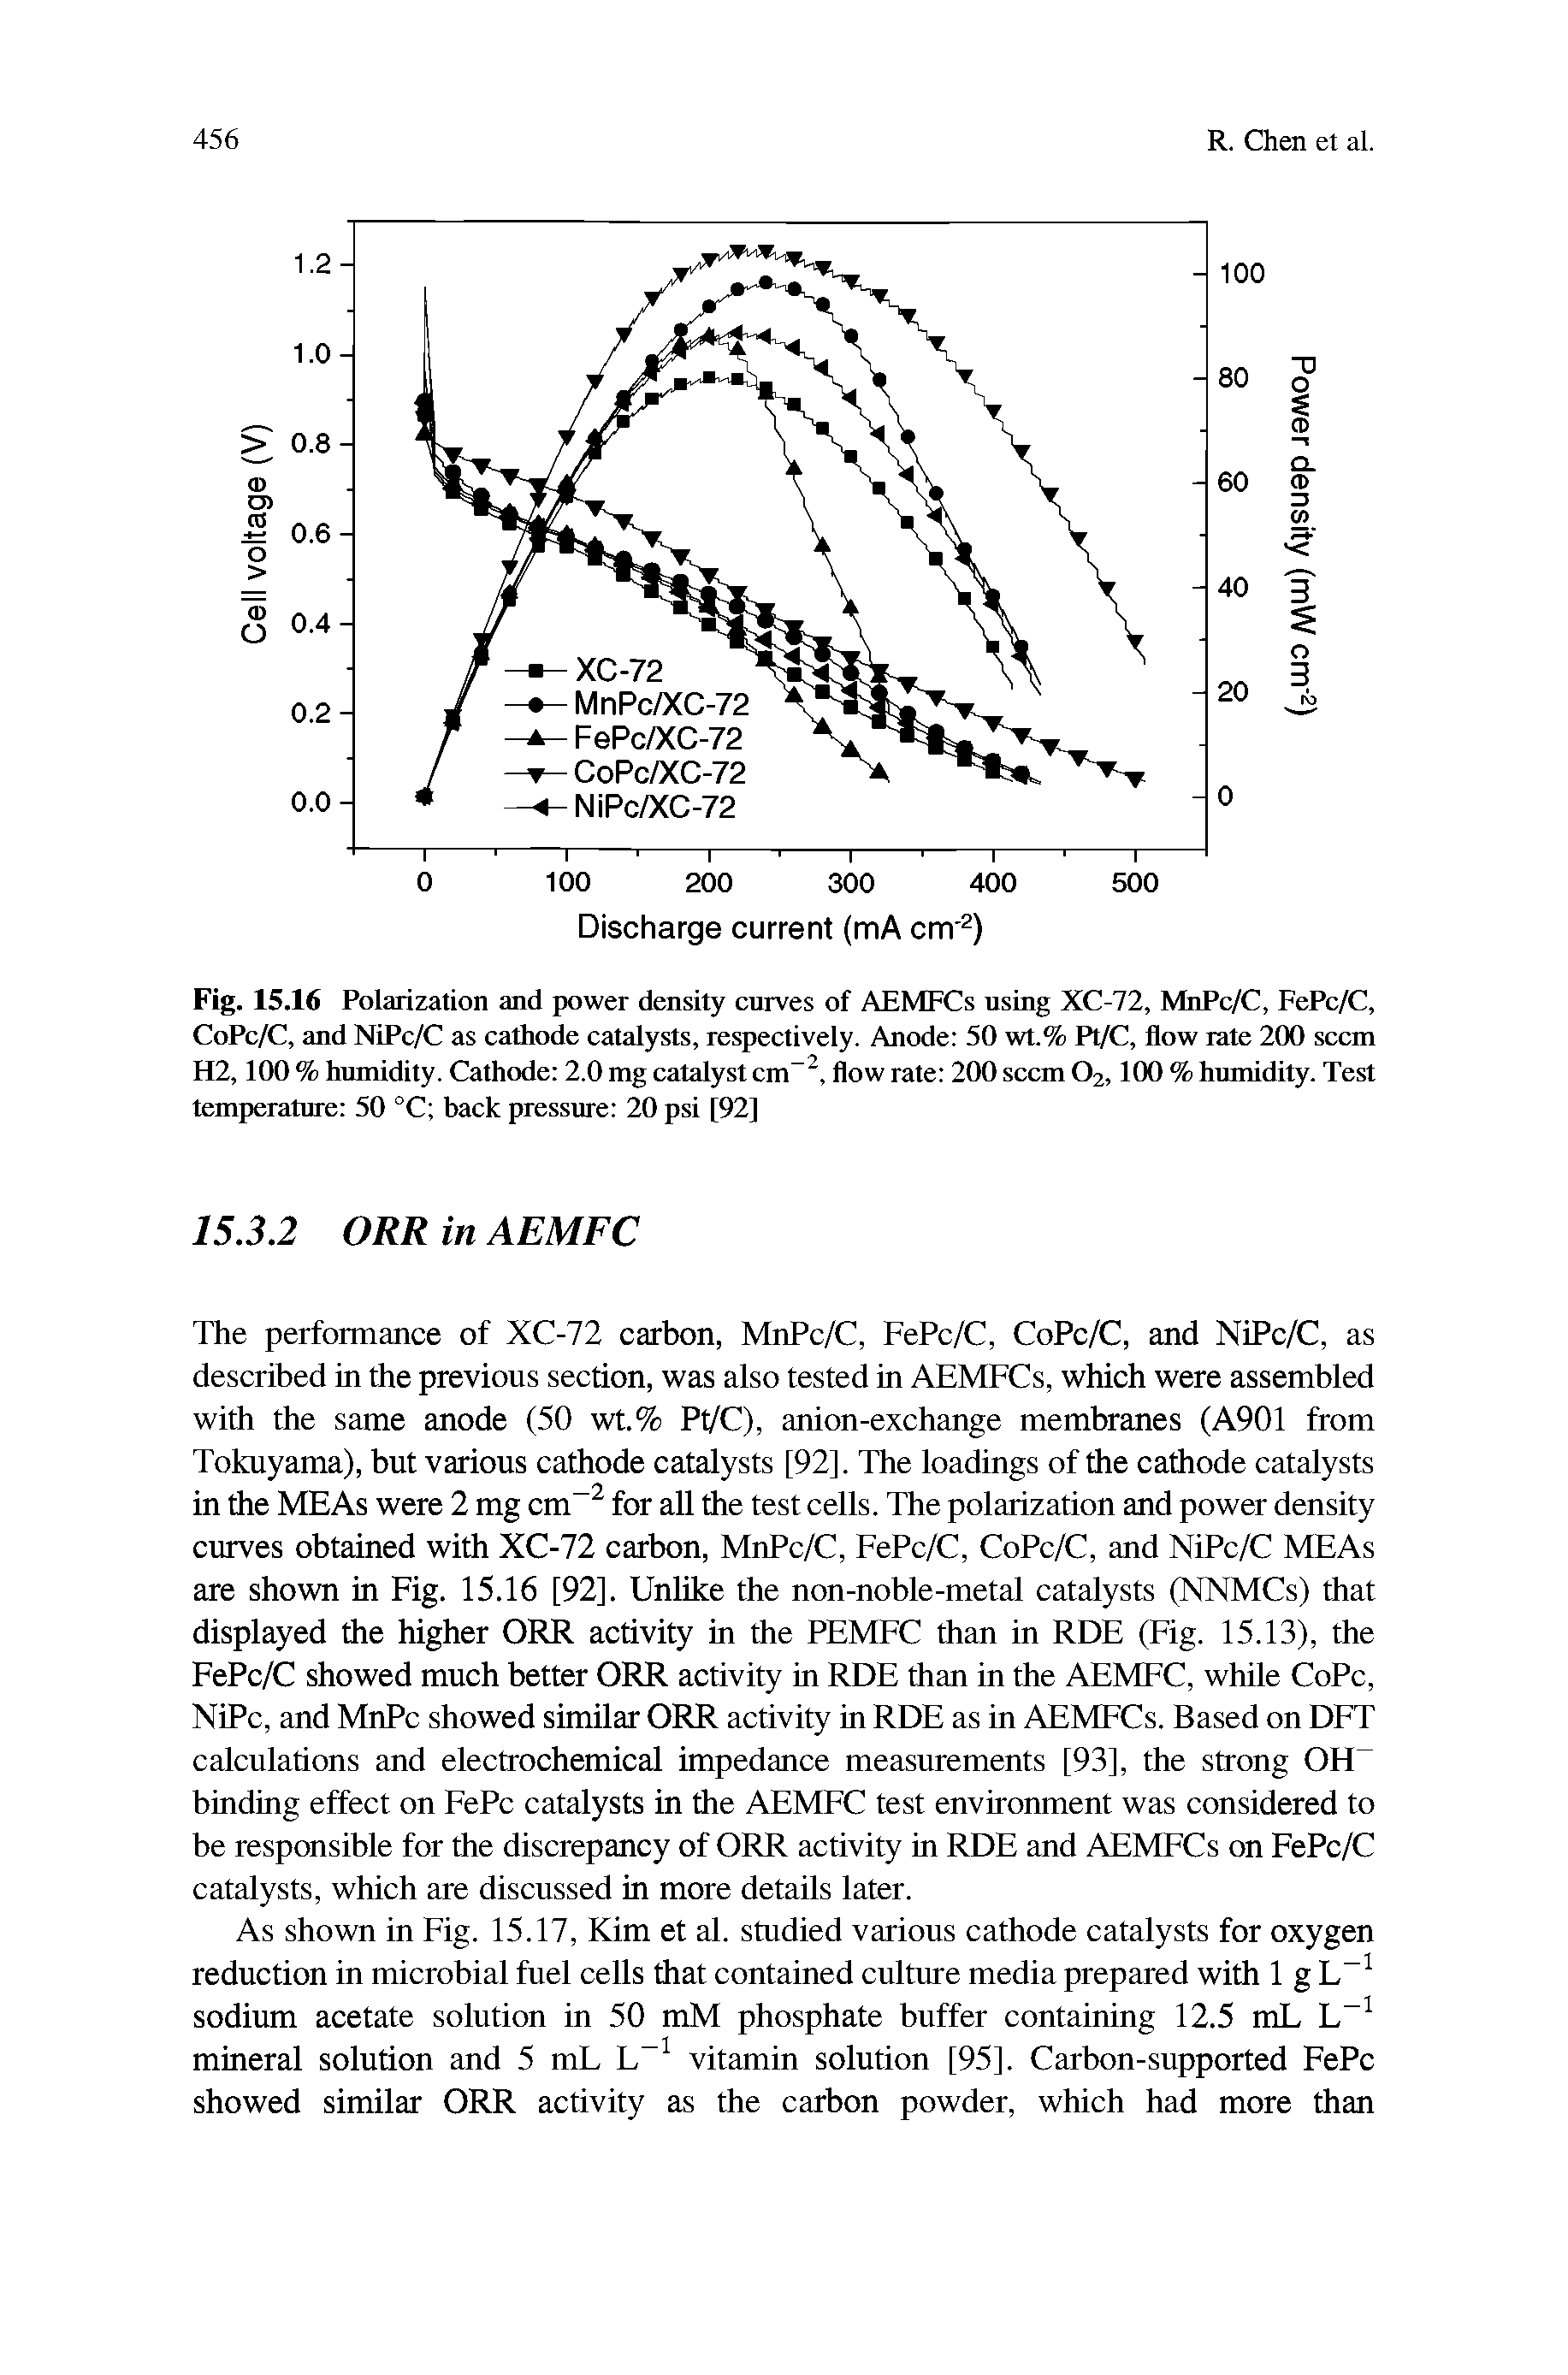 Fig. 15.16 Polarization and power density curves of AEMFCs using XC-72, MnPc/C, FePc/C, CoPc/C, and NiPc/C as cathode catalysts, respectively. Anode 50 wt.% Pl/C, flow rate 200 seem H2,100 % humidity. Cathode 2.0 mg catalyst cm , flow rate 200 seem O2,100 % humidity. Test temperature 50 °C back pressure 20 psi [92]...